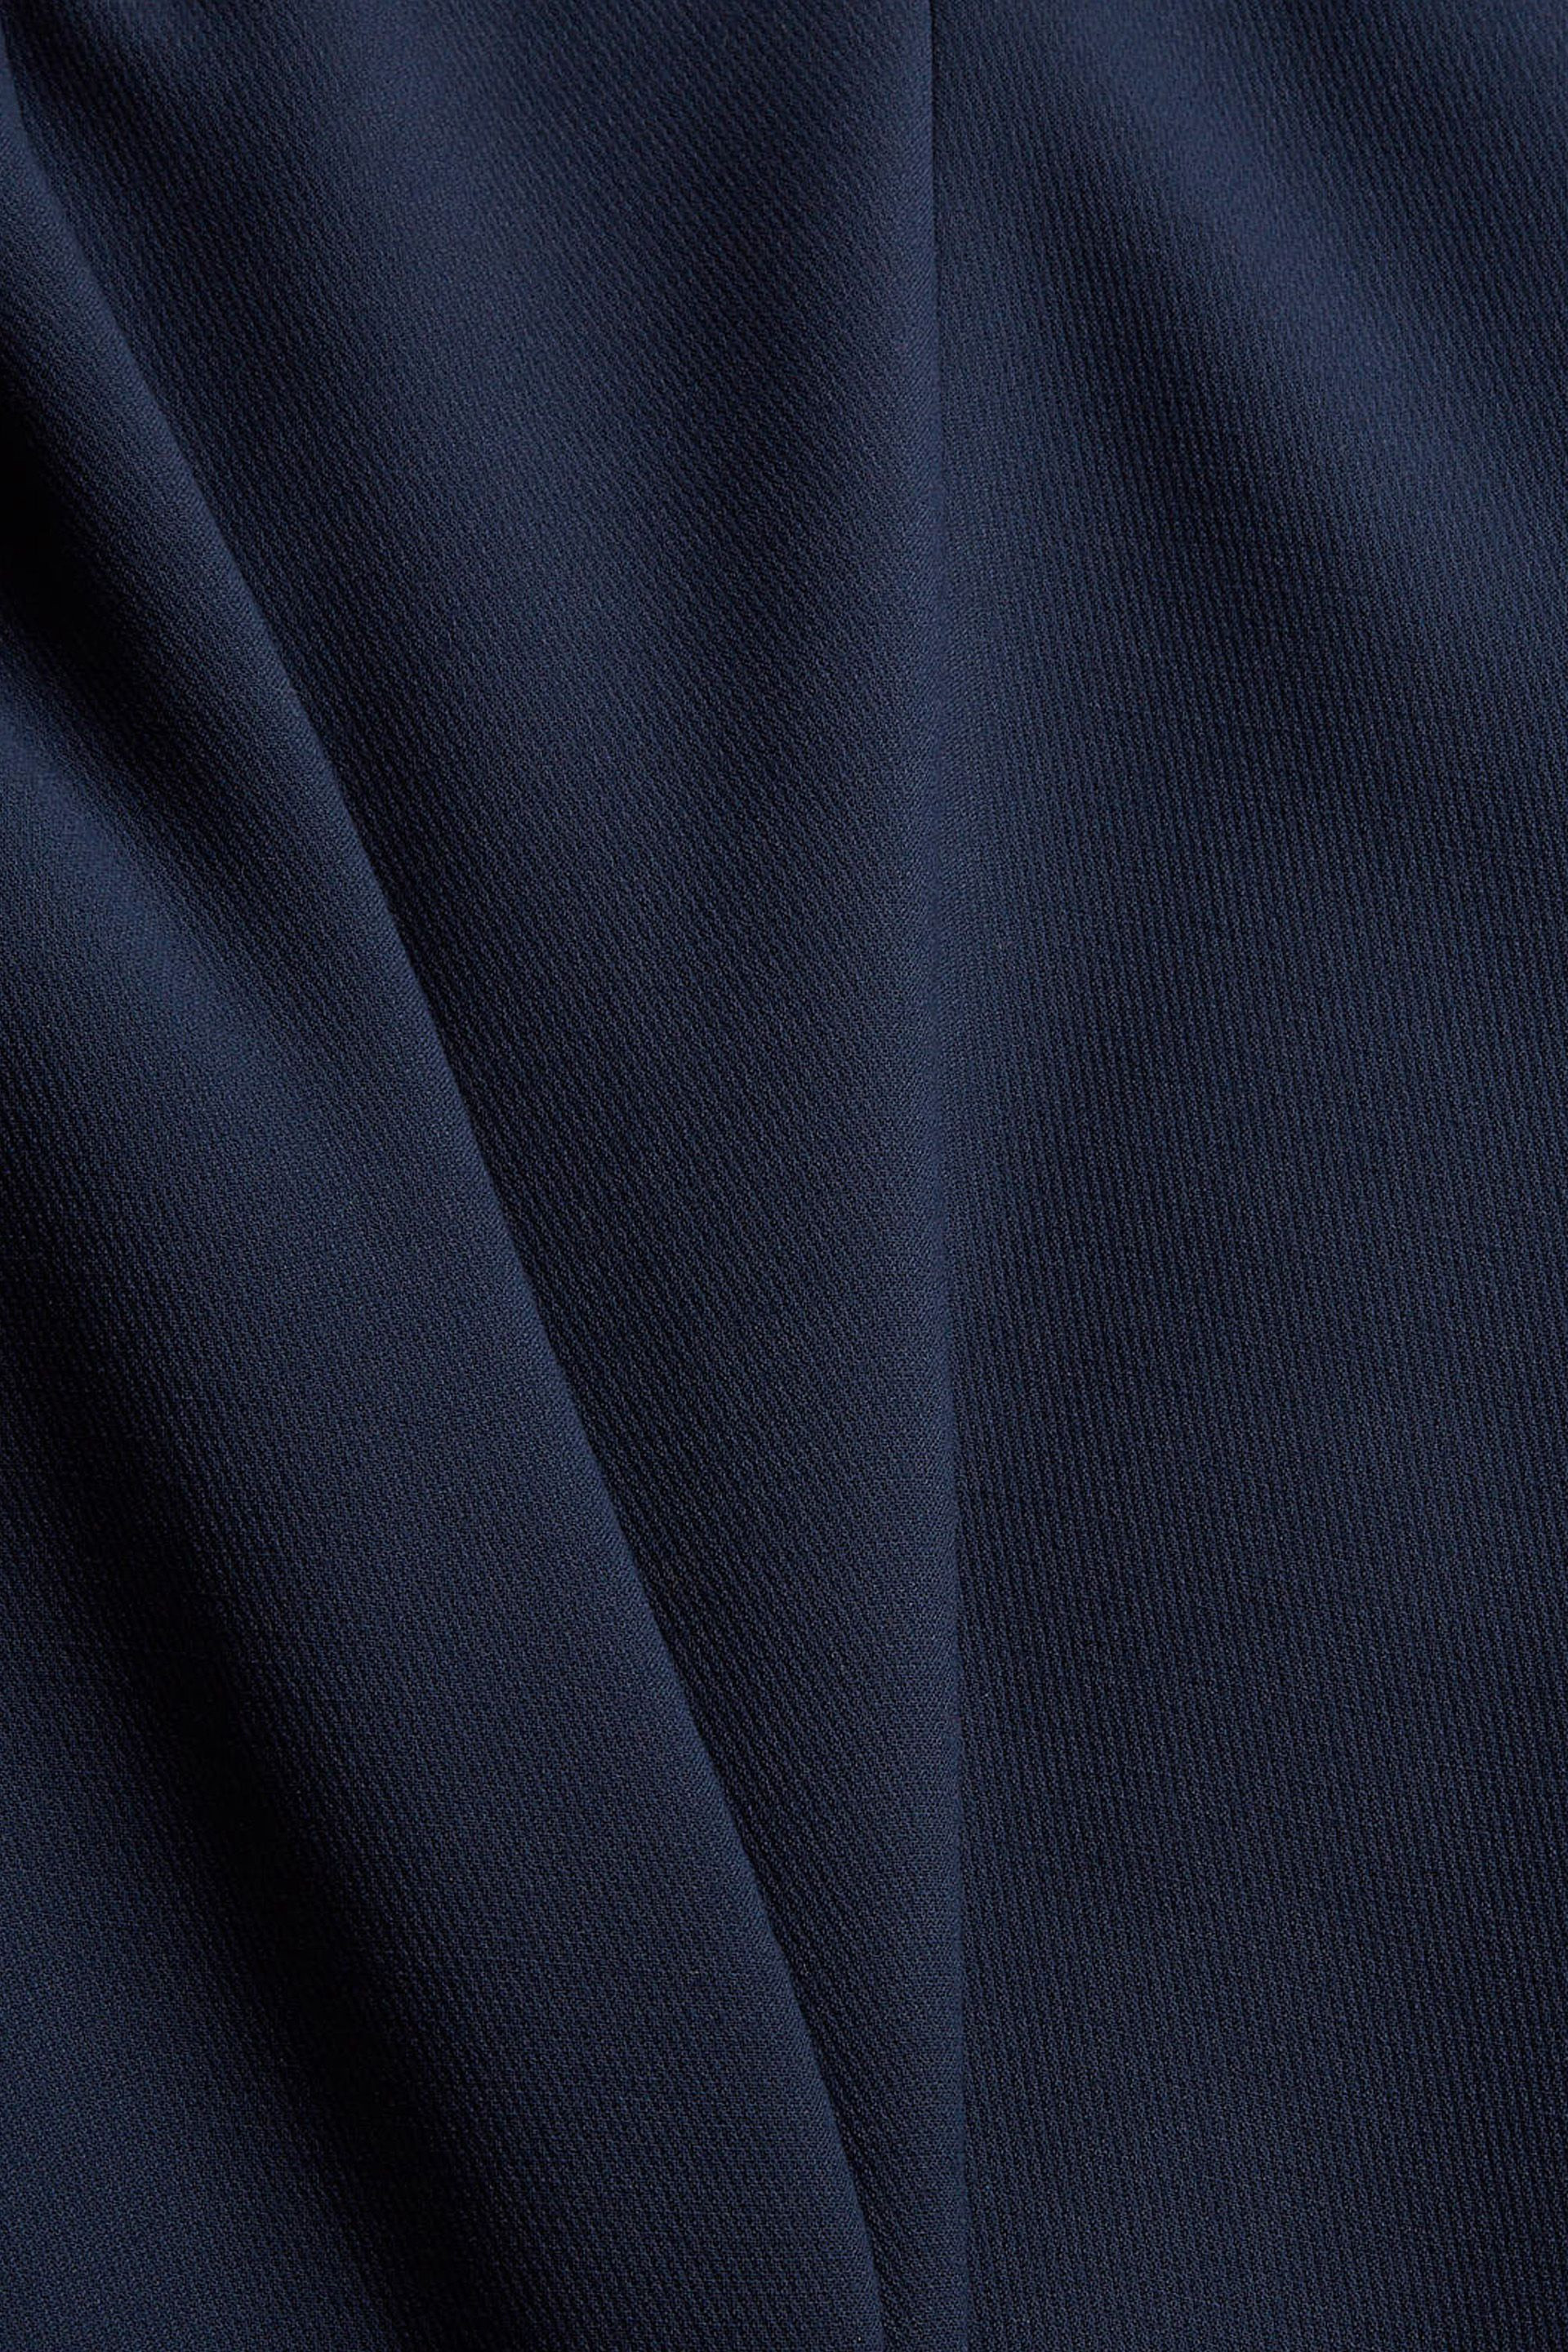 Cappotto sciancrato, Blu, large image number 3